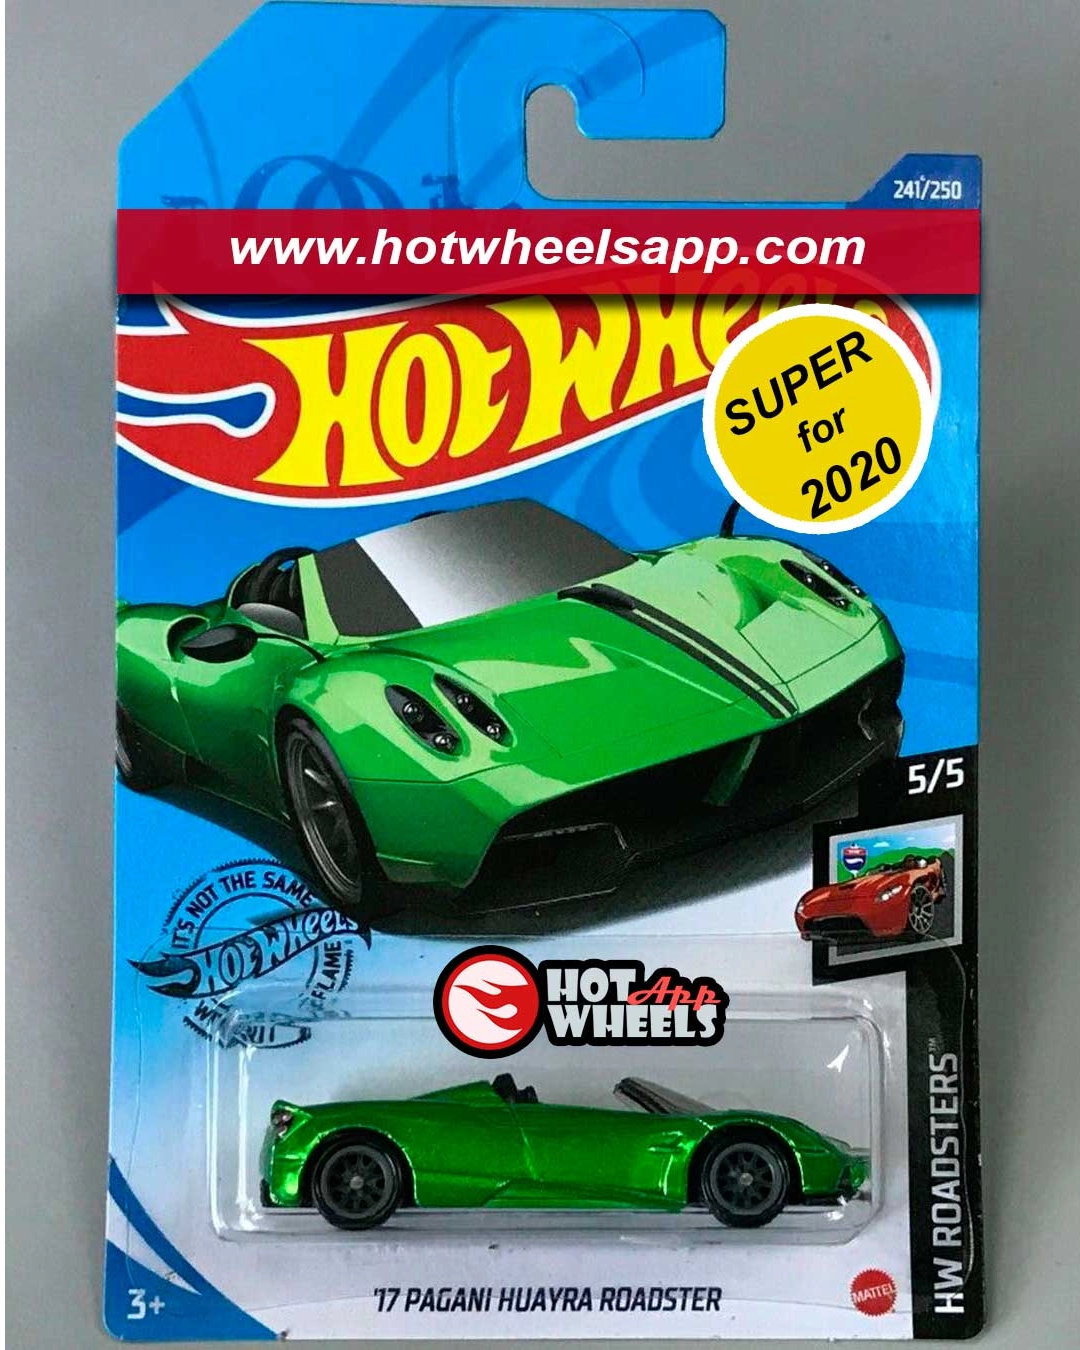 Details about   2020 HOT WHEELS ~ HW ROADSTERS 5/5 ~ '17 PAGANI HUAYRA ROADSTER ~ 241/250